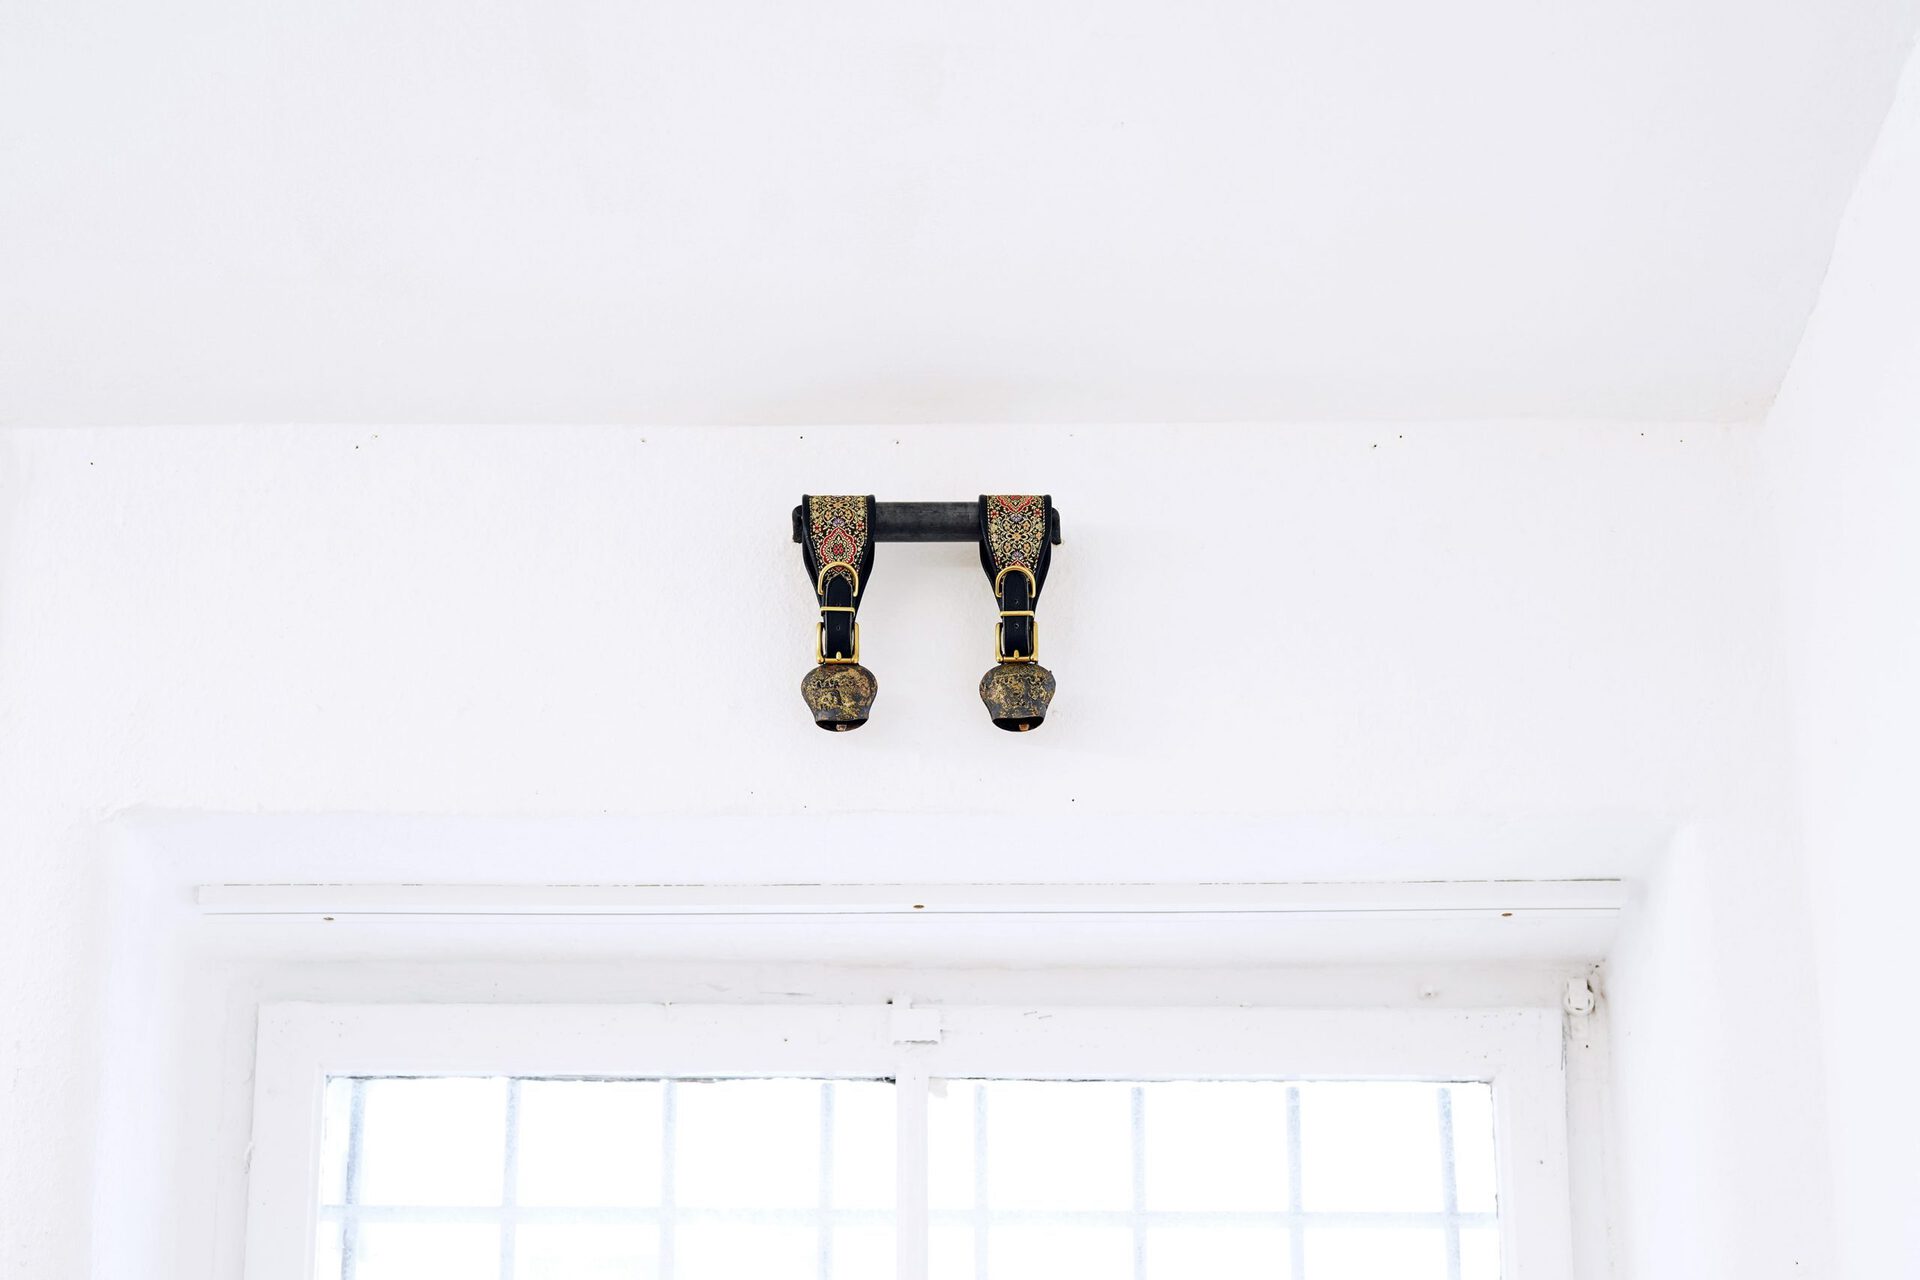 Eliza Ballesteros, DOMESTIC HECK II, 2019, antique goat bells with greyhound collars, brass, leather, brocade, iron hooks, 20 x 20 x 5 cm